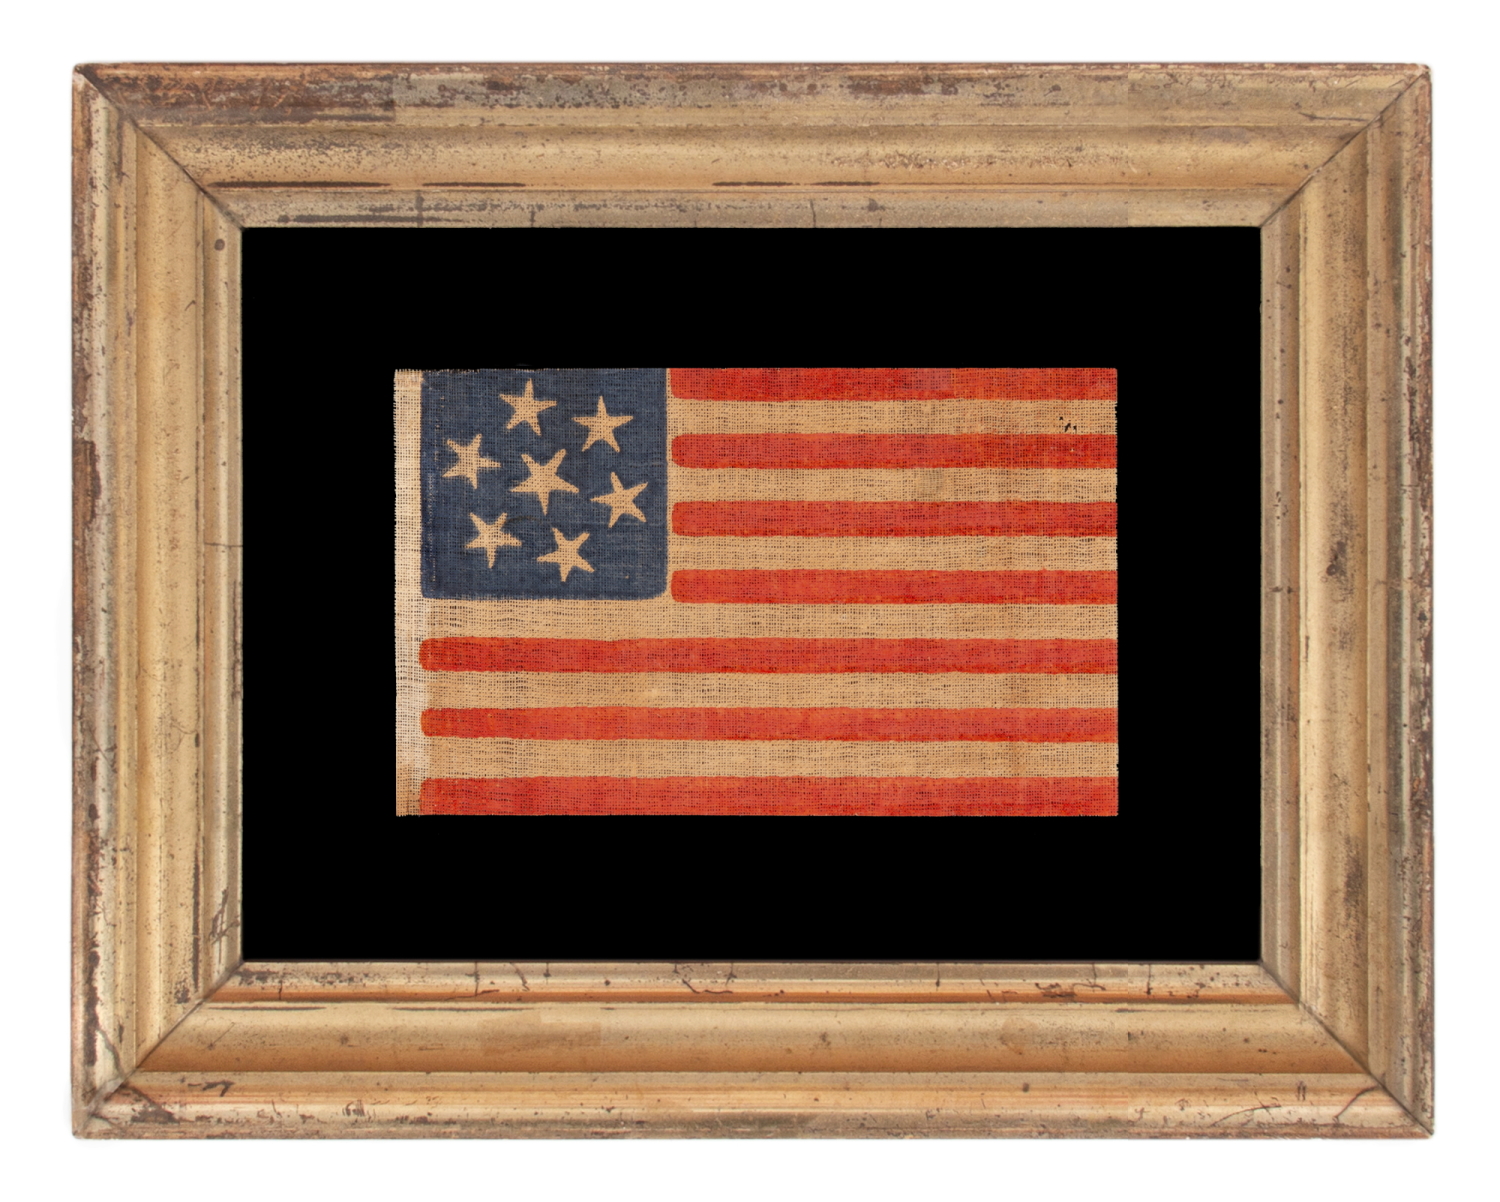 7 STARS WITH WHIMSICAL PROFILES ON AN ANTIQUE AMERICAN PARADE FLAG, MADE TO REFLECT THE INITIAL WAVE OF 7 STATES SECEDED FROM THE UNION, A CIVIL WAR PERIOD EXAMPLE, THE LARGEST OF SEVERAL KNOWN VARIETIES, MADE circa 1861